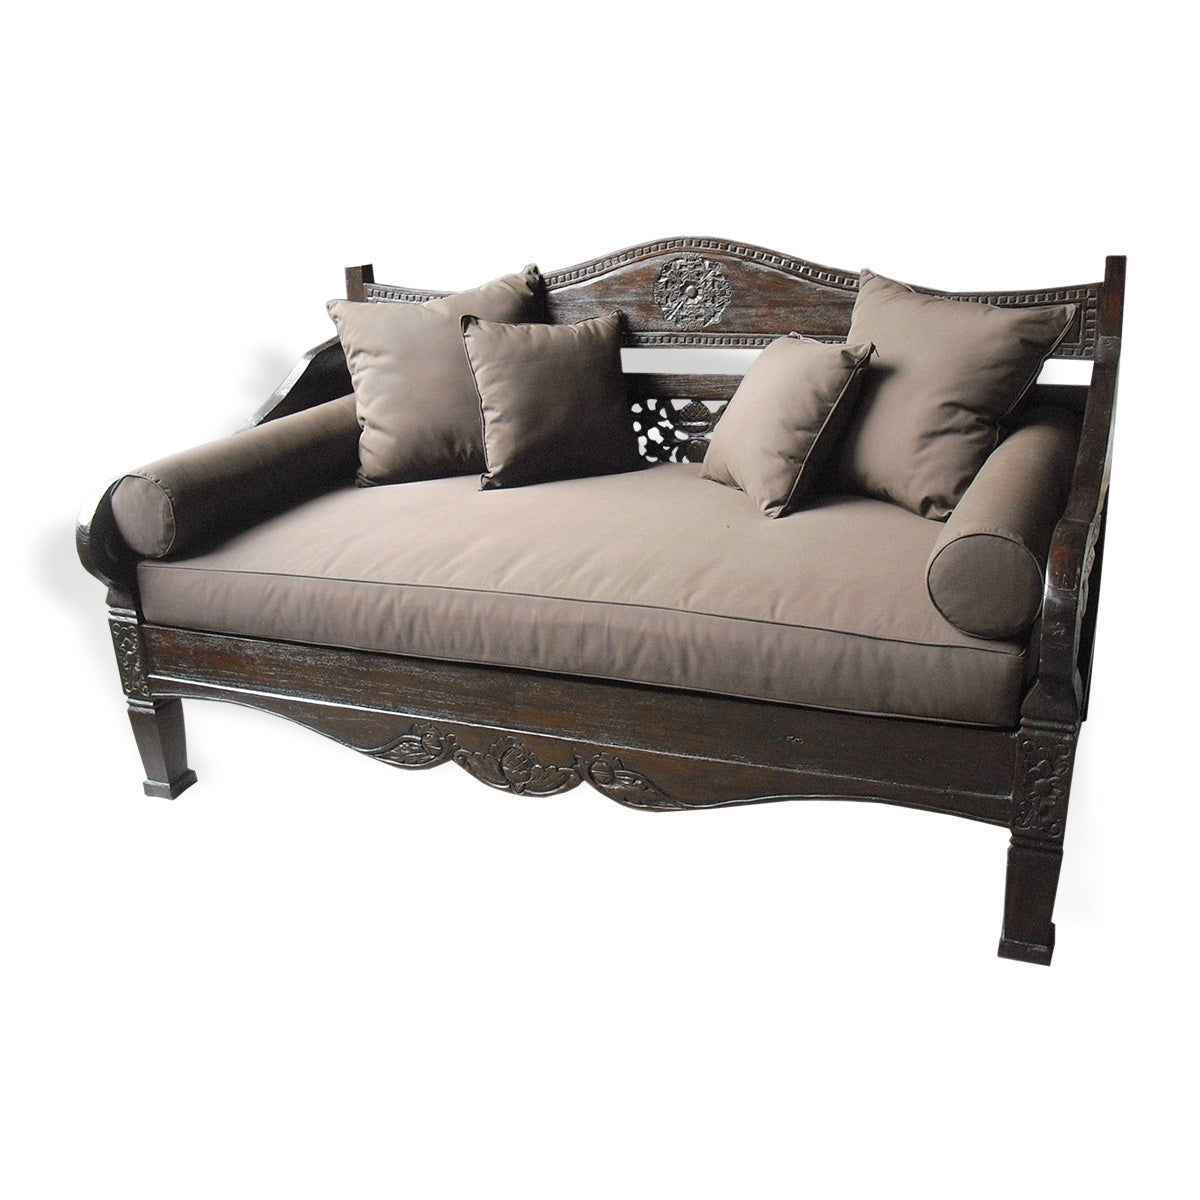 KYT-SPDF001 CHOCOLATE RECYCLED TEAK WOOD CARVED SOFA (PRICE WITHOUT CUSHION)